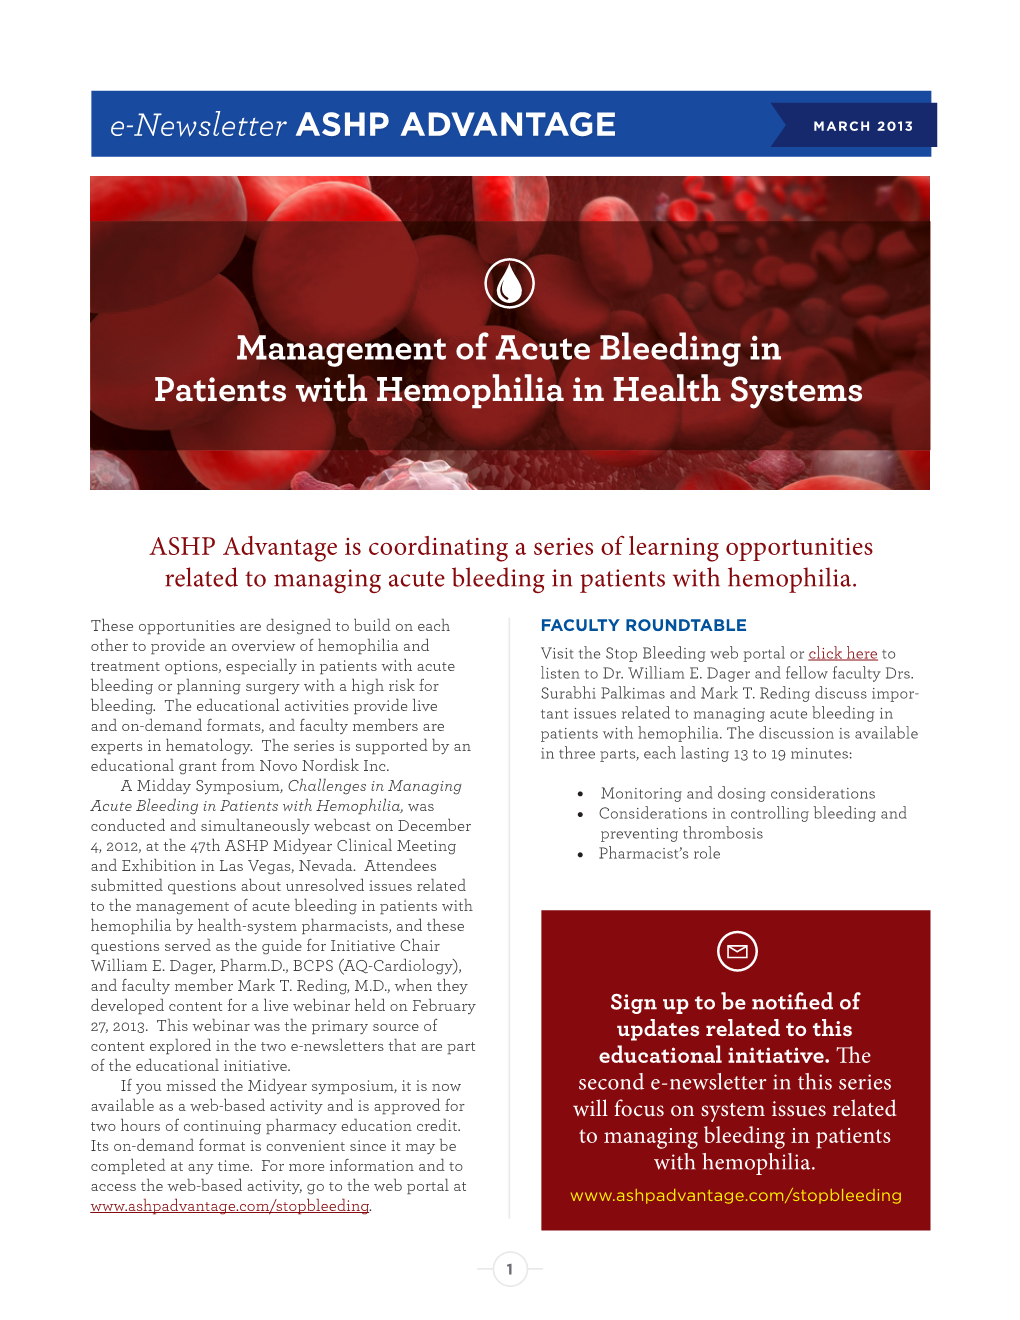 Management of Acute Bleeding in Patients with Hemophilia in Health Systems